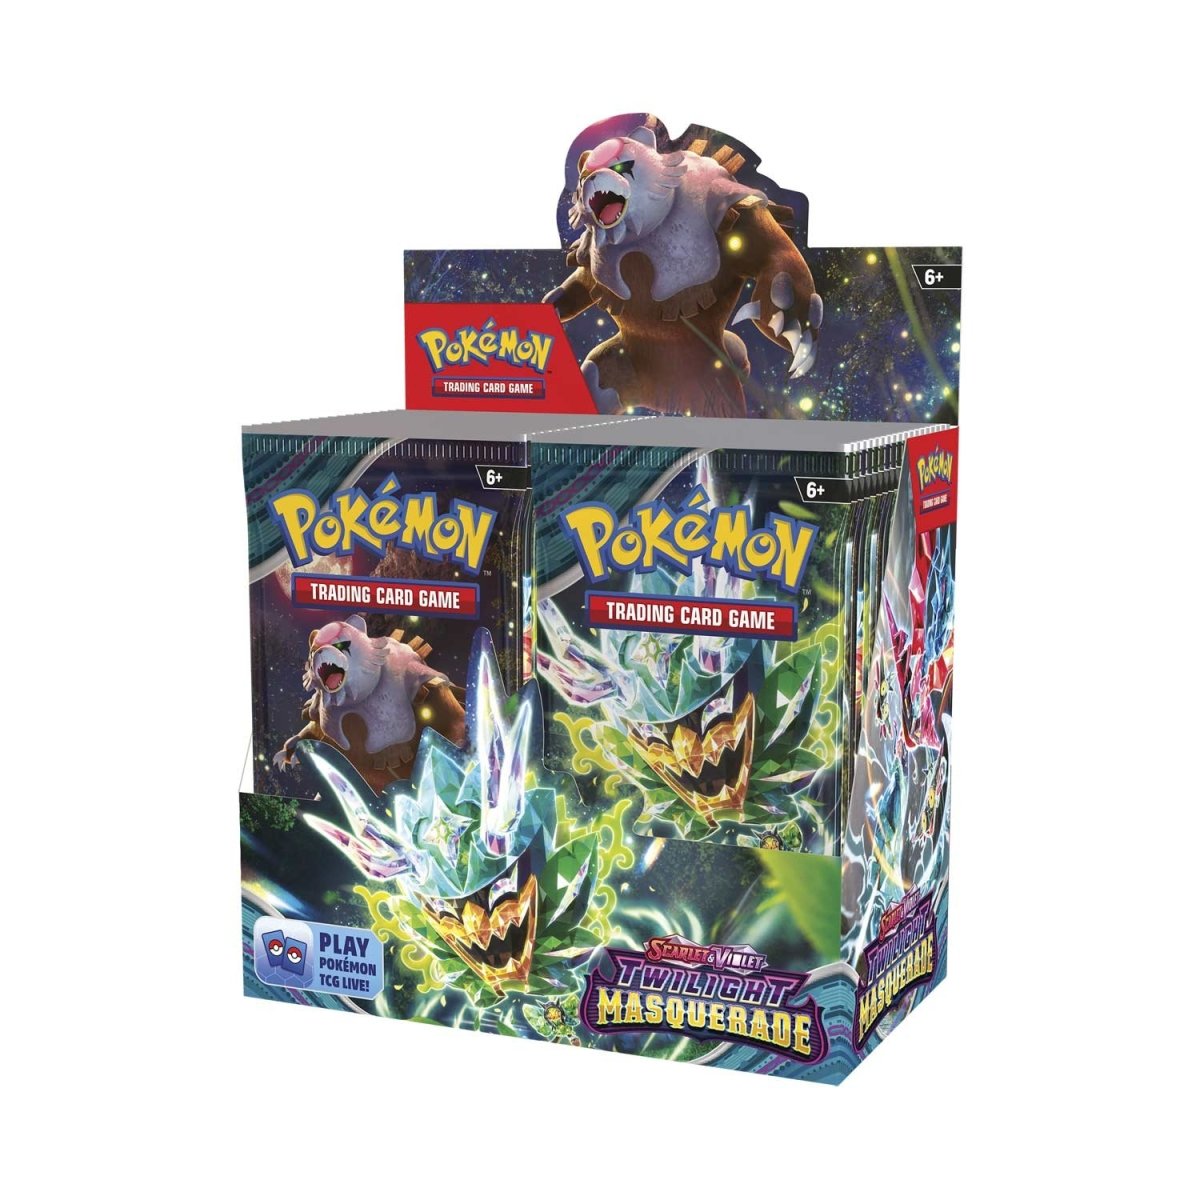 Pokémon TCG: Scarlet & Violet-Twilight Masquerade Booster Display Box (36 Packs) Pre-order Ships Late May